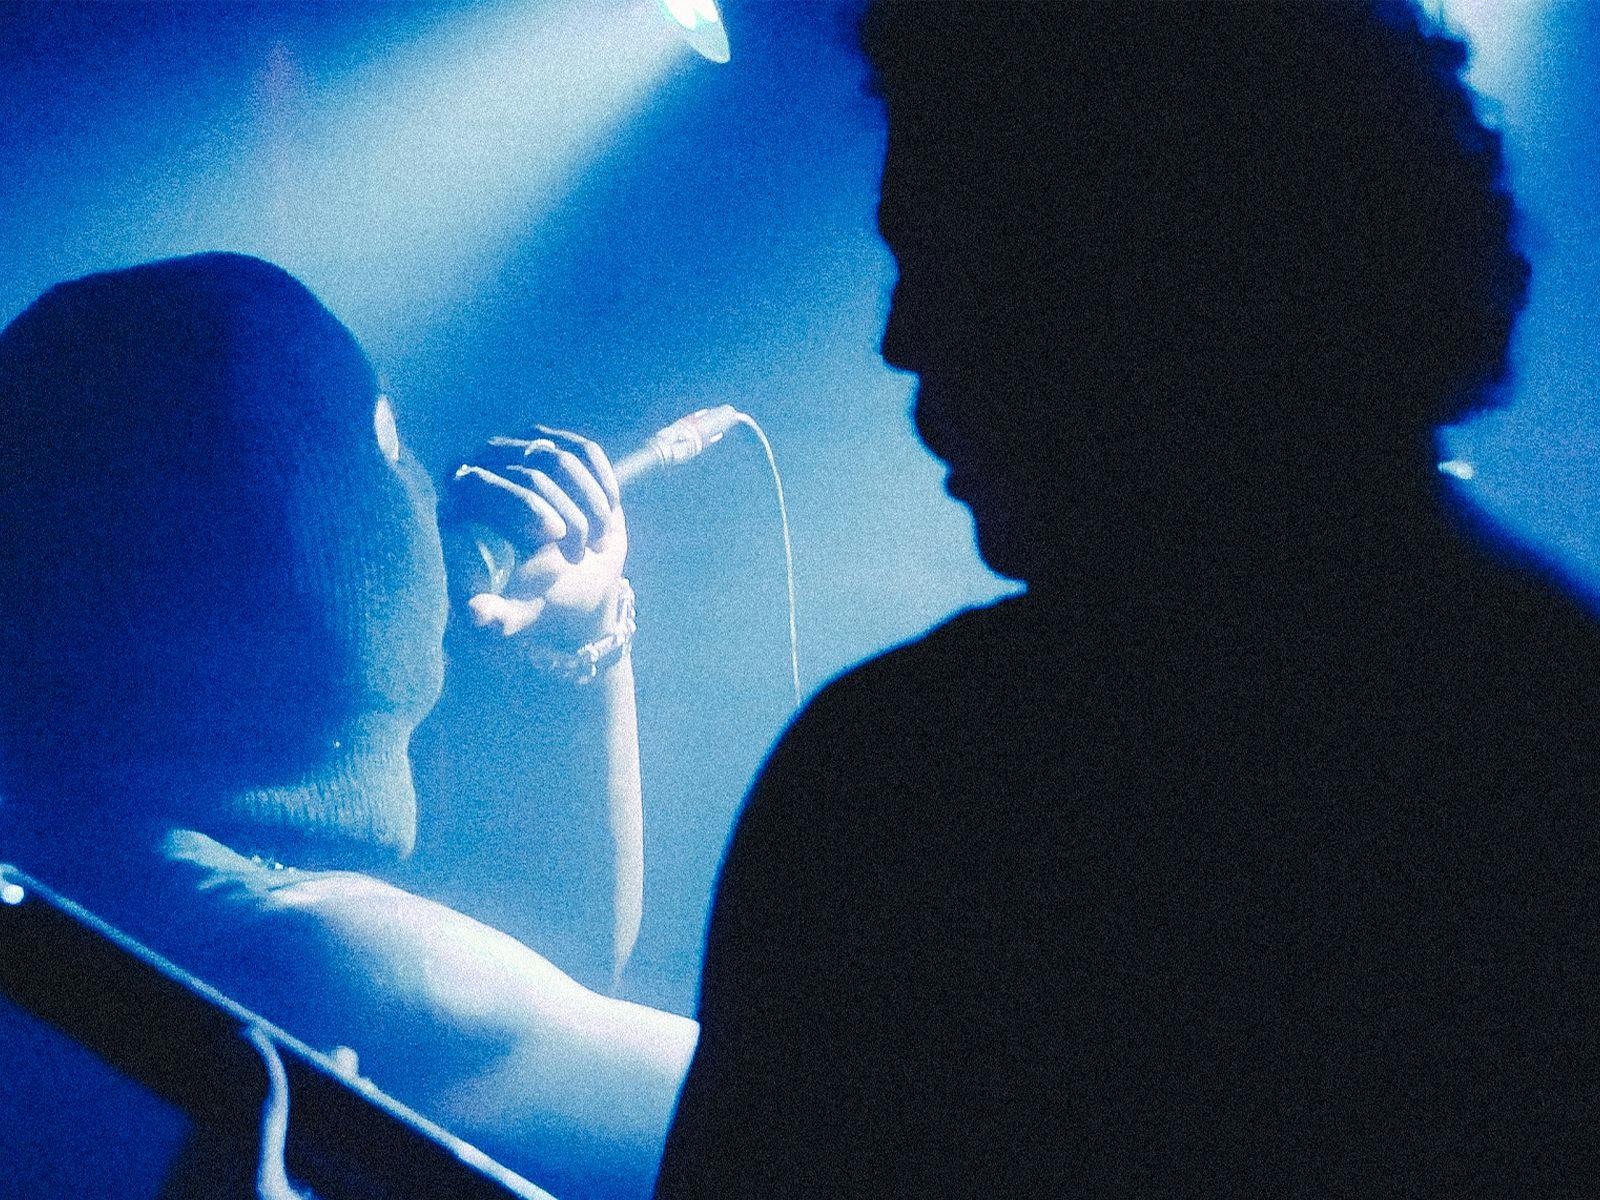 A silhouetted guitar player foregrounds a balaclava wearing person performing with a microphone.